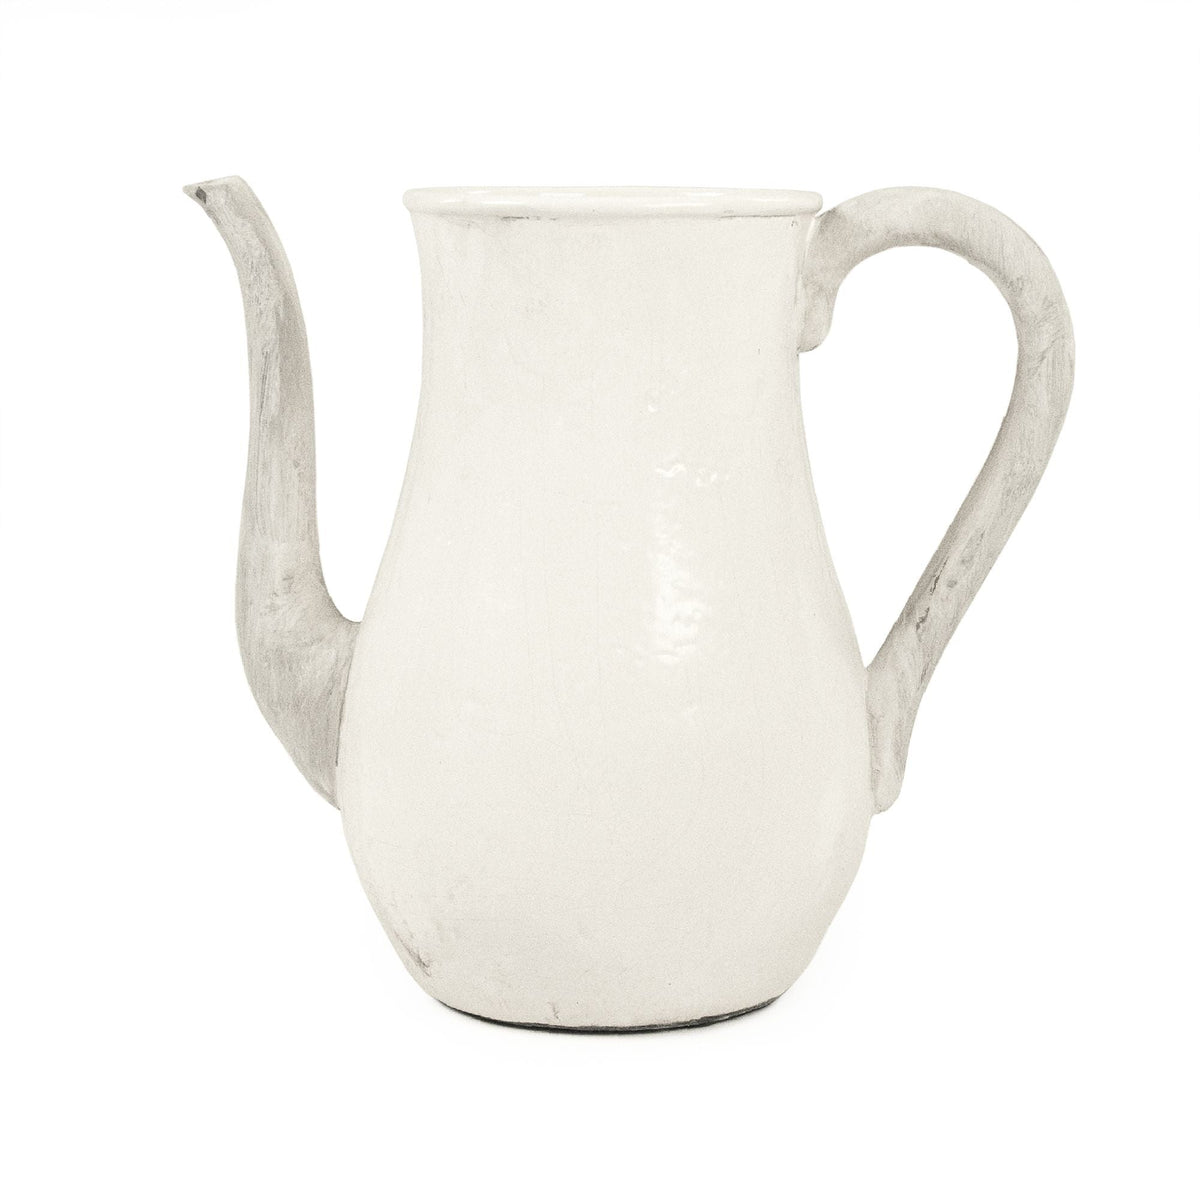 Distressed White Pitcher (9824L A25A) by Zentique